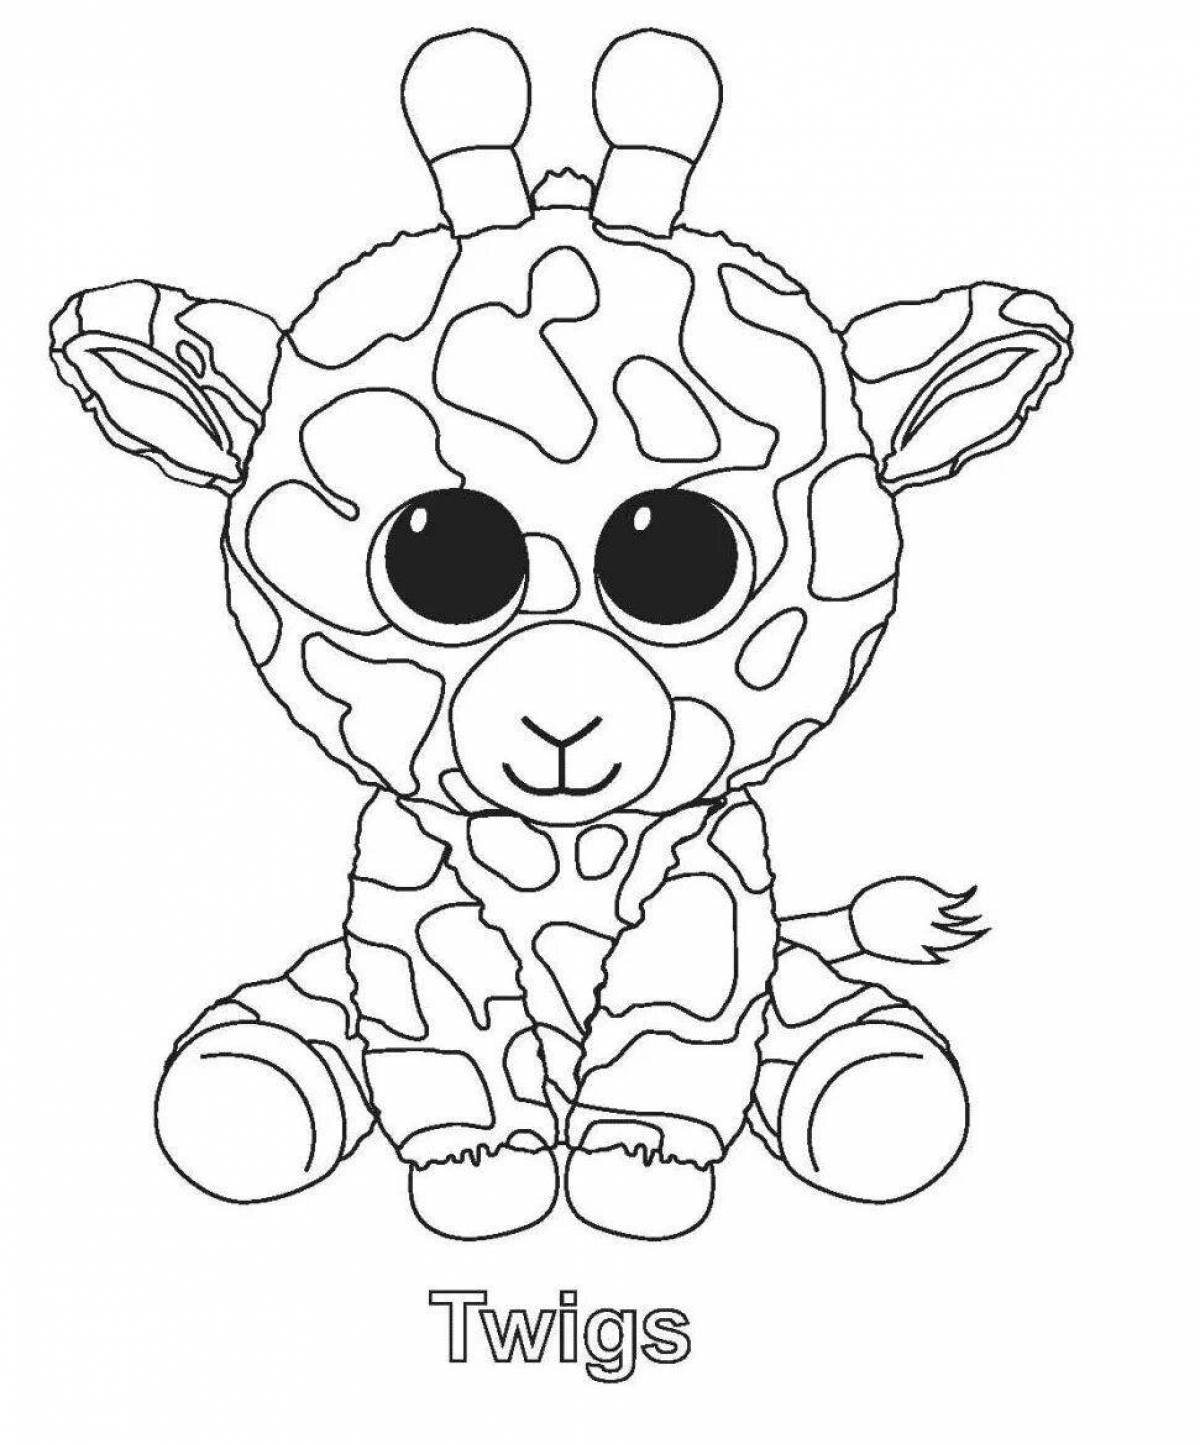 Animated push plush coloring page